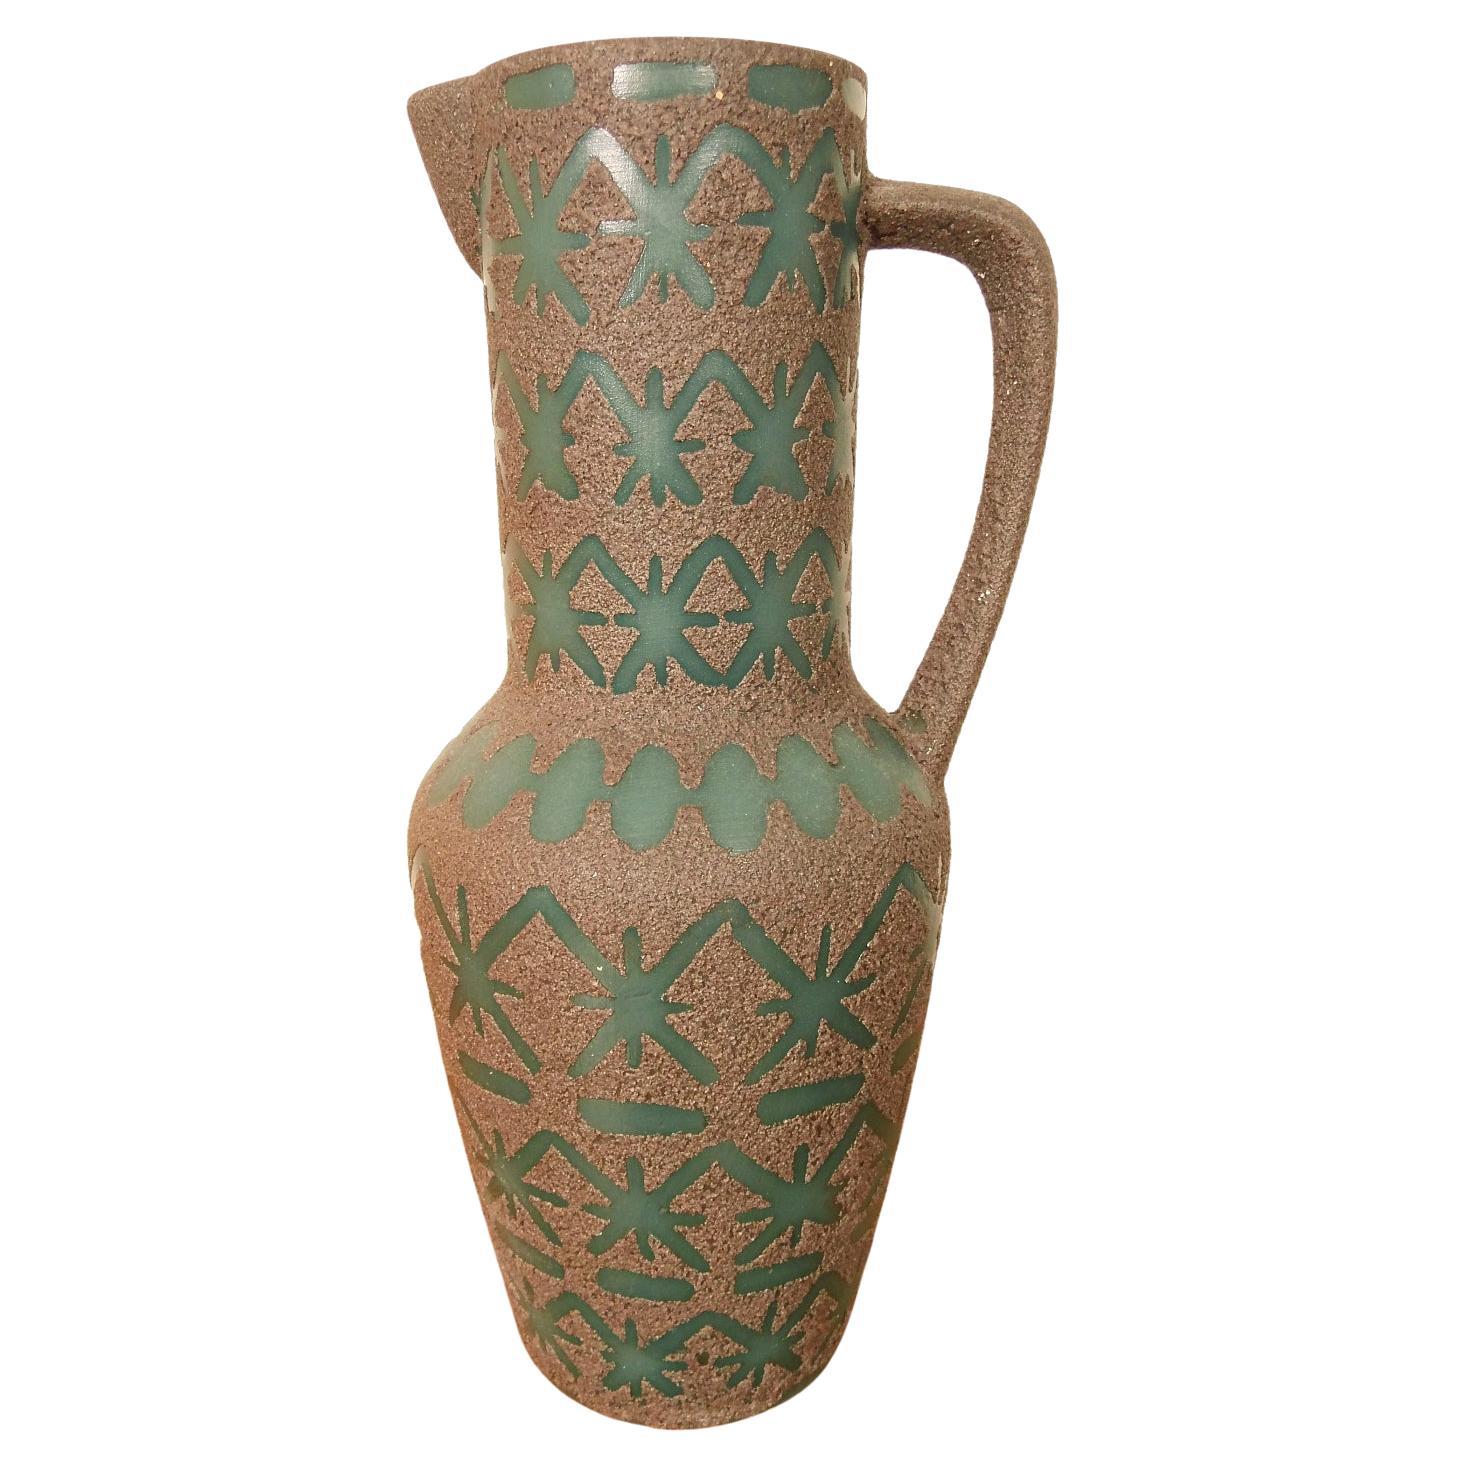 Handmade Pottery Vase with handle by Ceramno Rustica, Germany